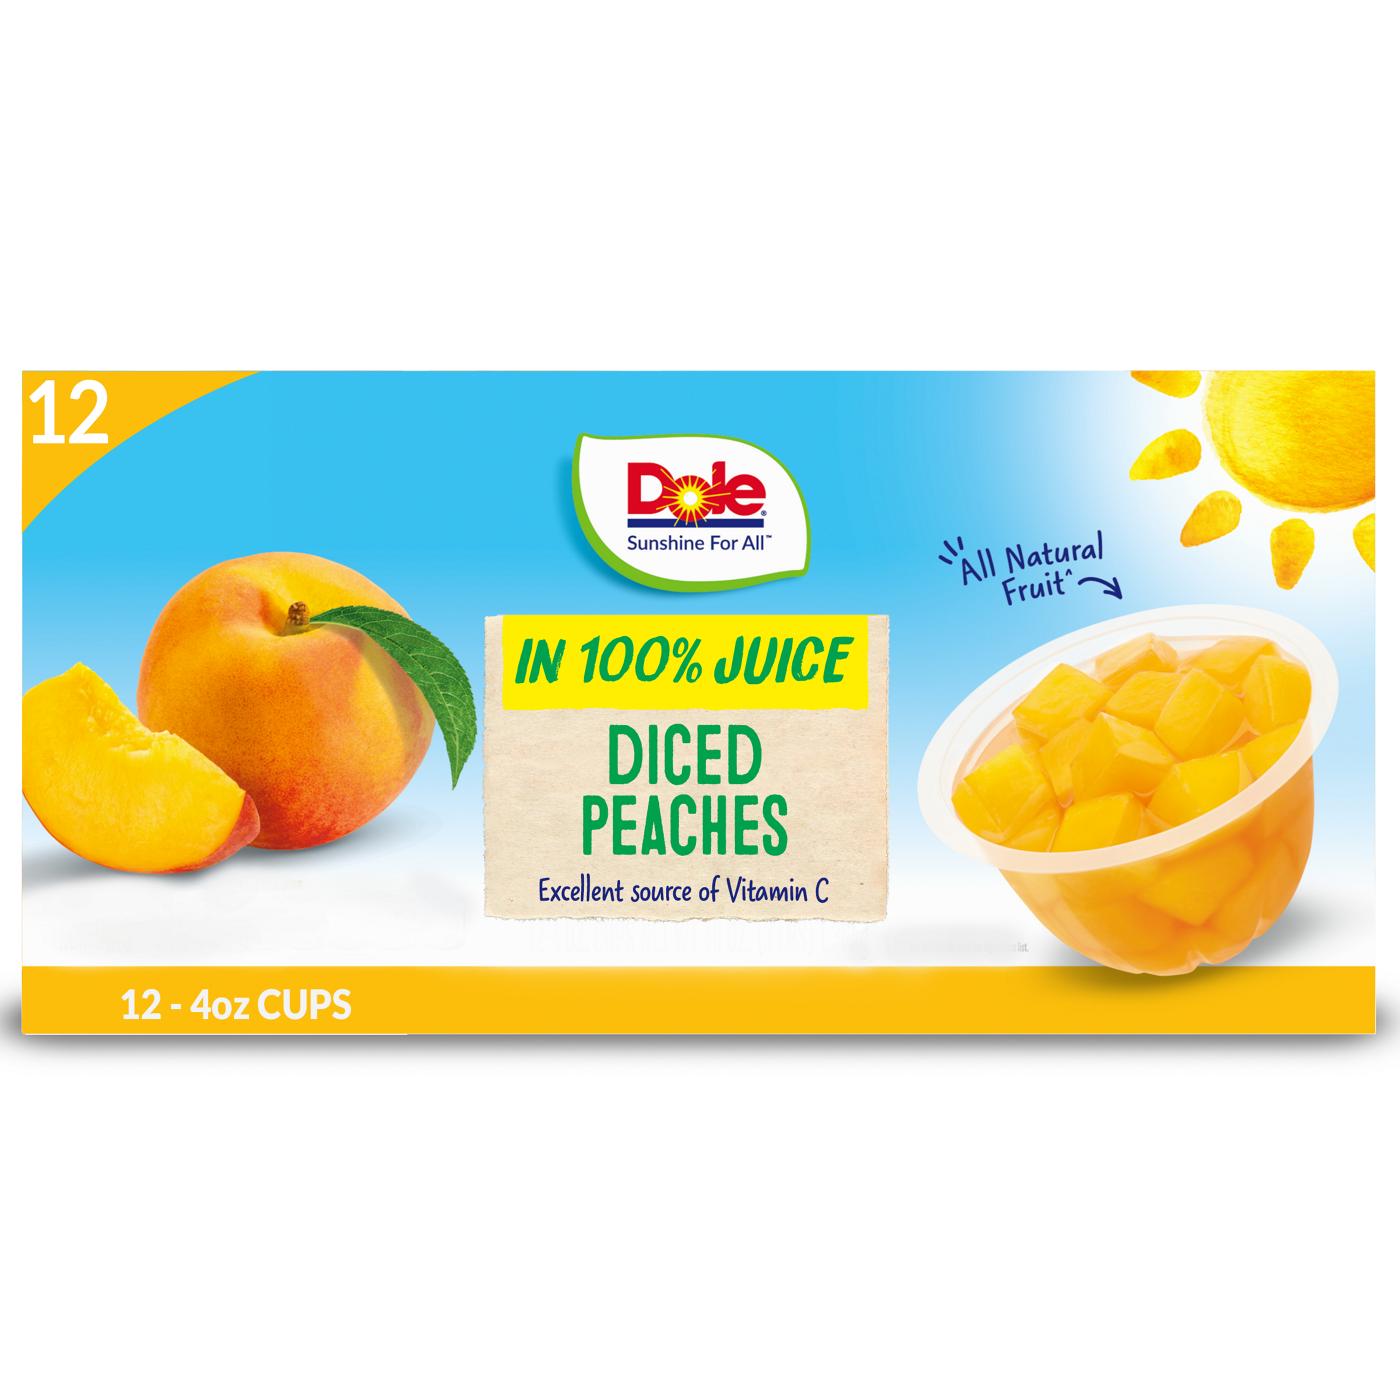 Dole Fruit Bowls - Diced Peaches in 100% Juice; image 1 of 8